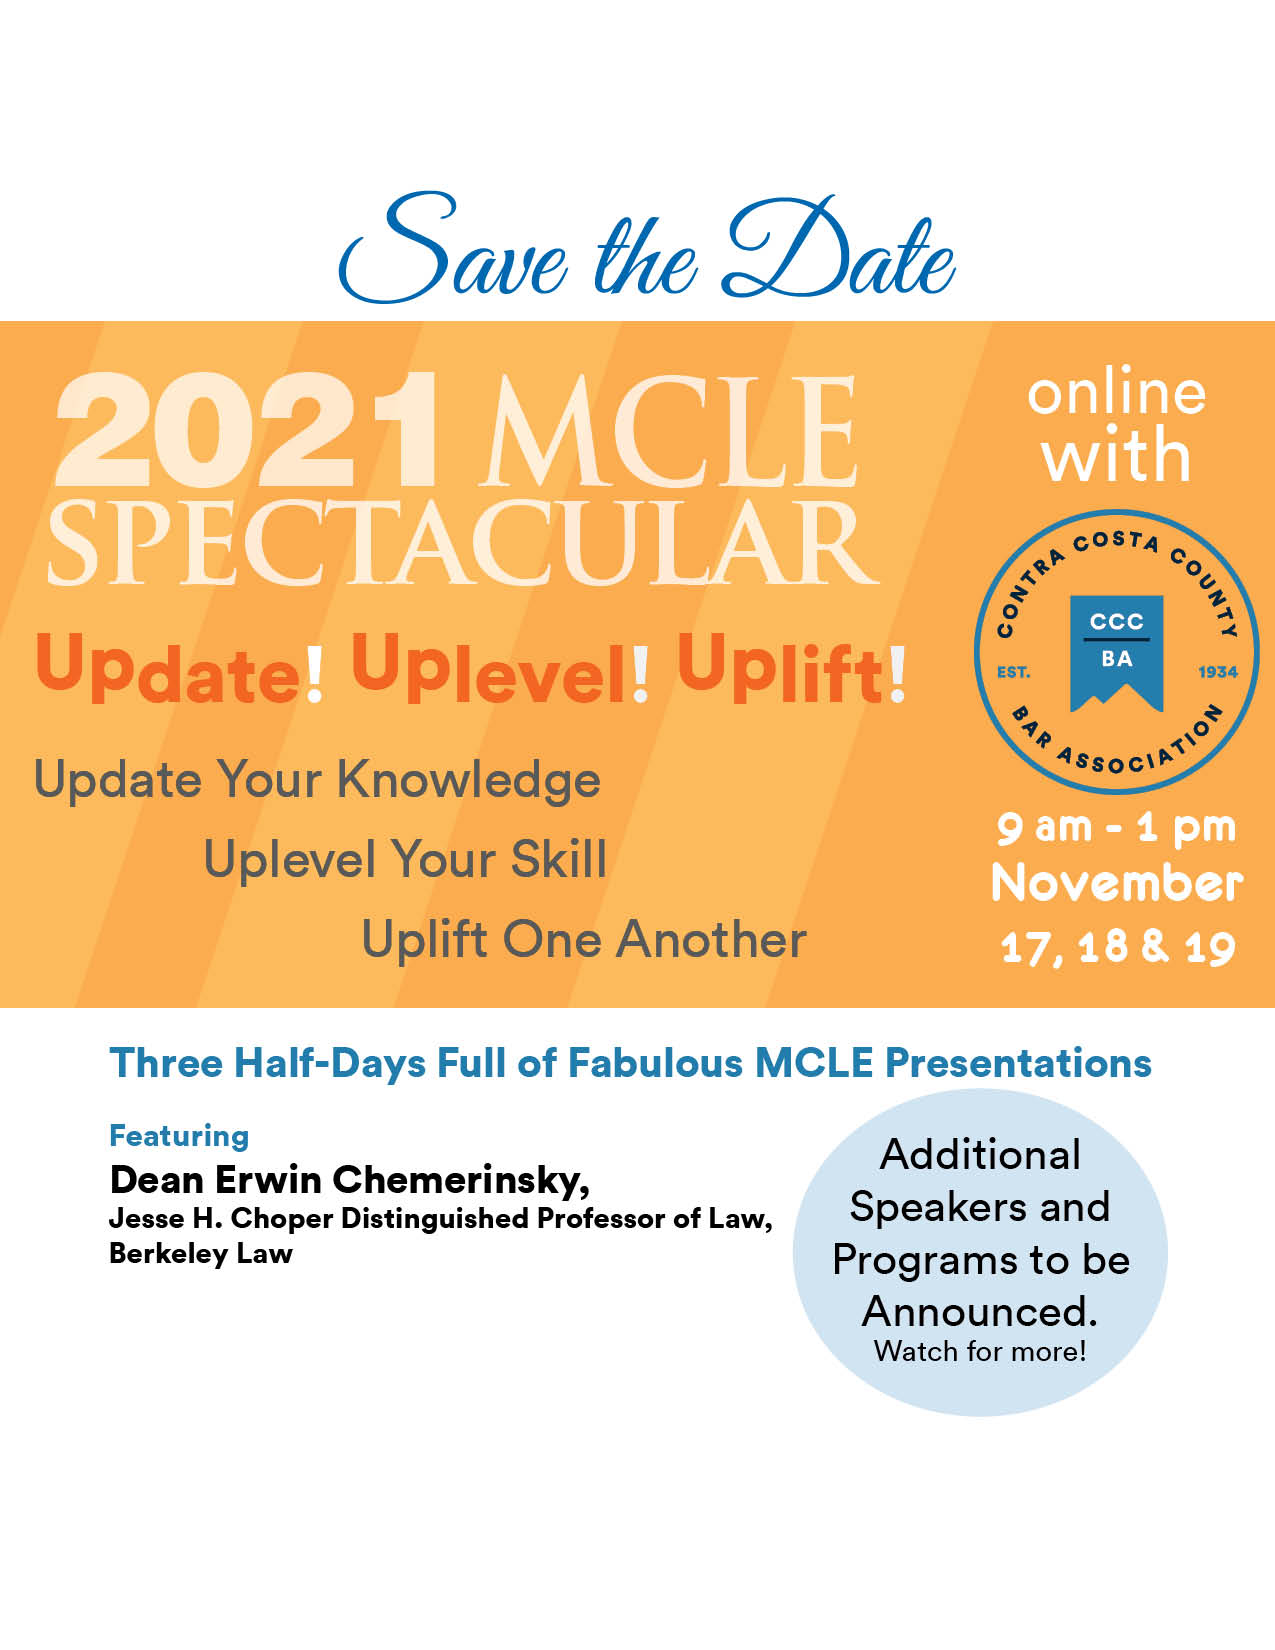 MCLE Spectacular 2021